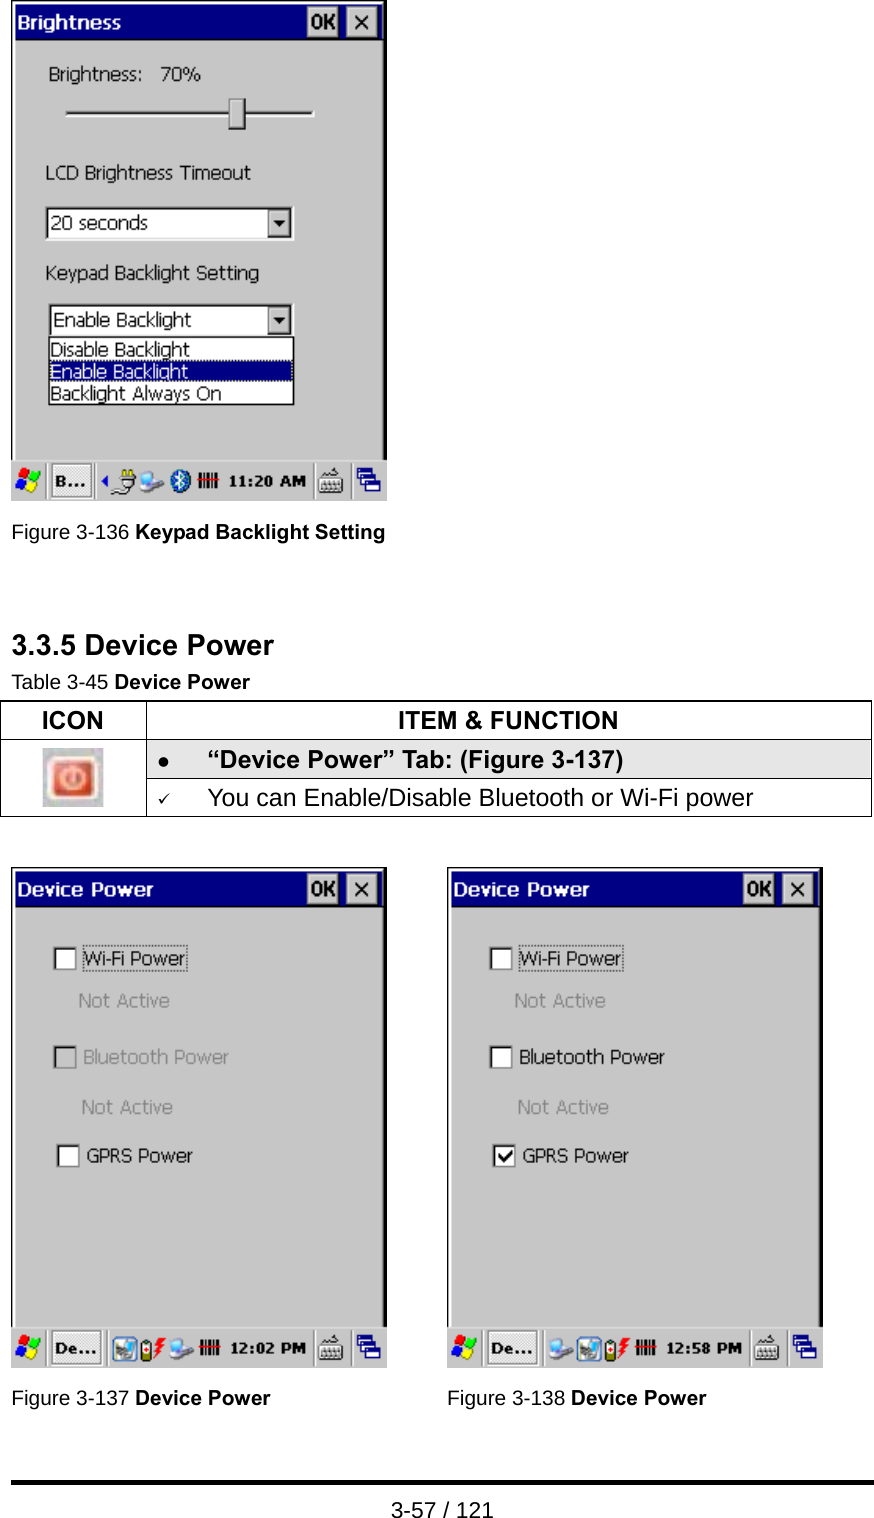  3-57 / 121   Figure 3-136 Keypad Backlight Setting    3.3.5 Device Power Table 3-45 Device Power ICON  ITEM &amp; FUNCTION z “Device Power” Tab: (Figure 3-137)  9 You can Enable/Disable Bluetooth or Wi-Fi power     Figure 3-137 Device Power Figure 3-138 Device Power 